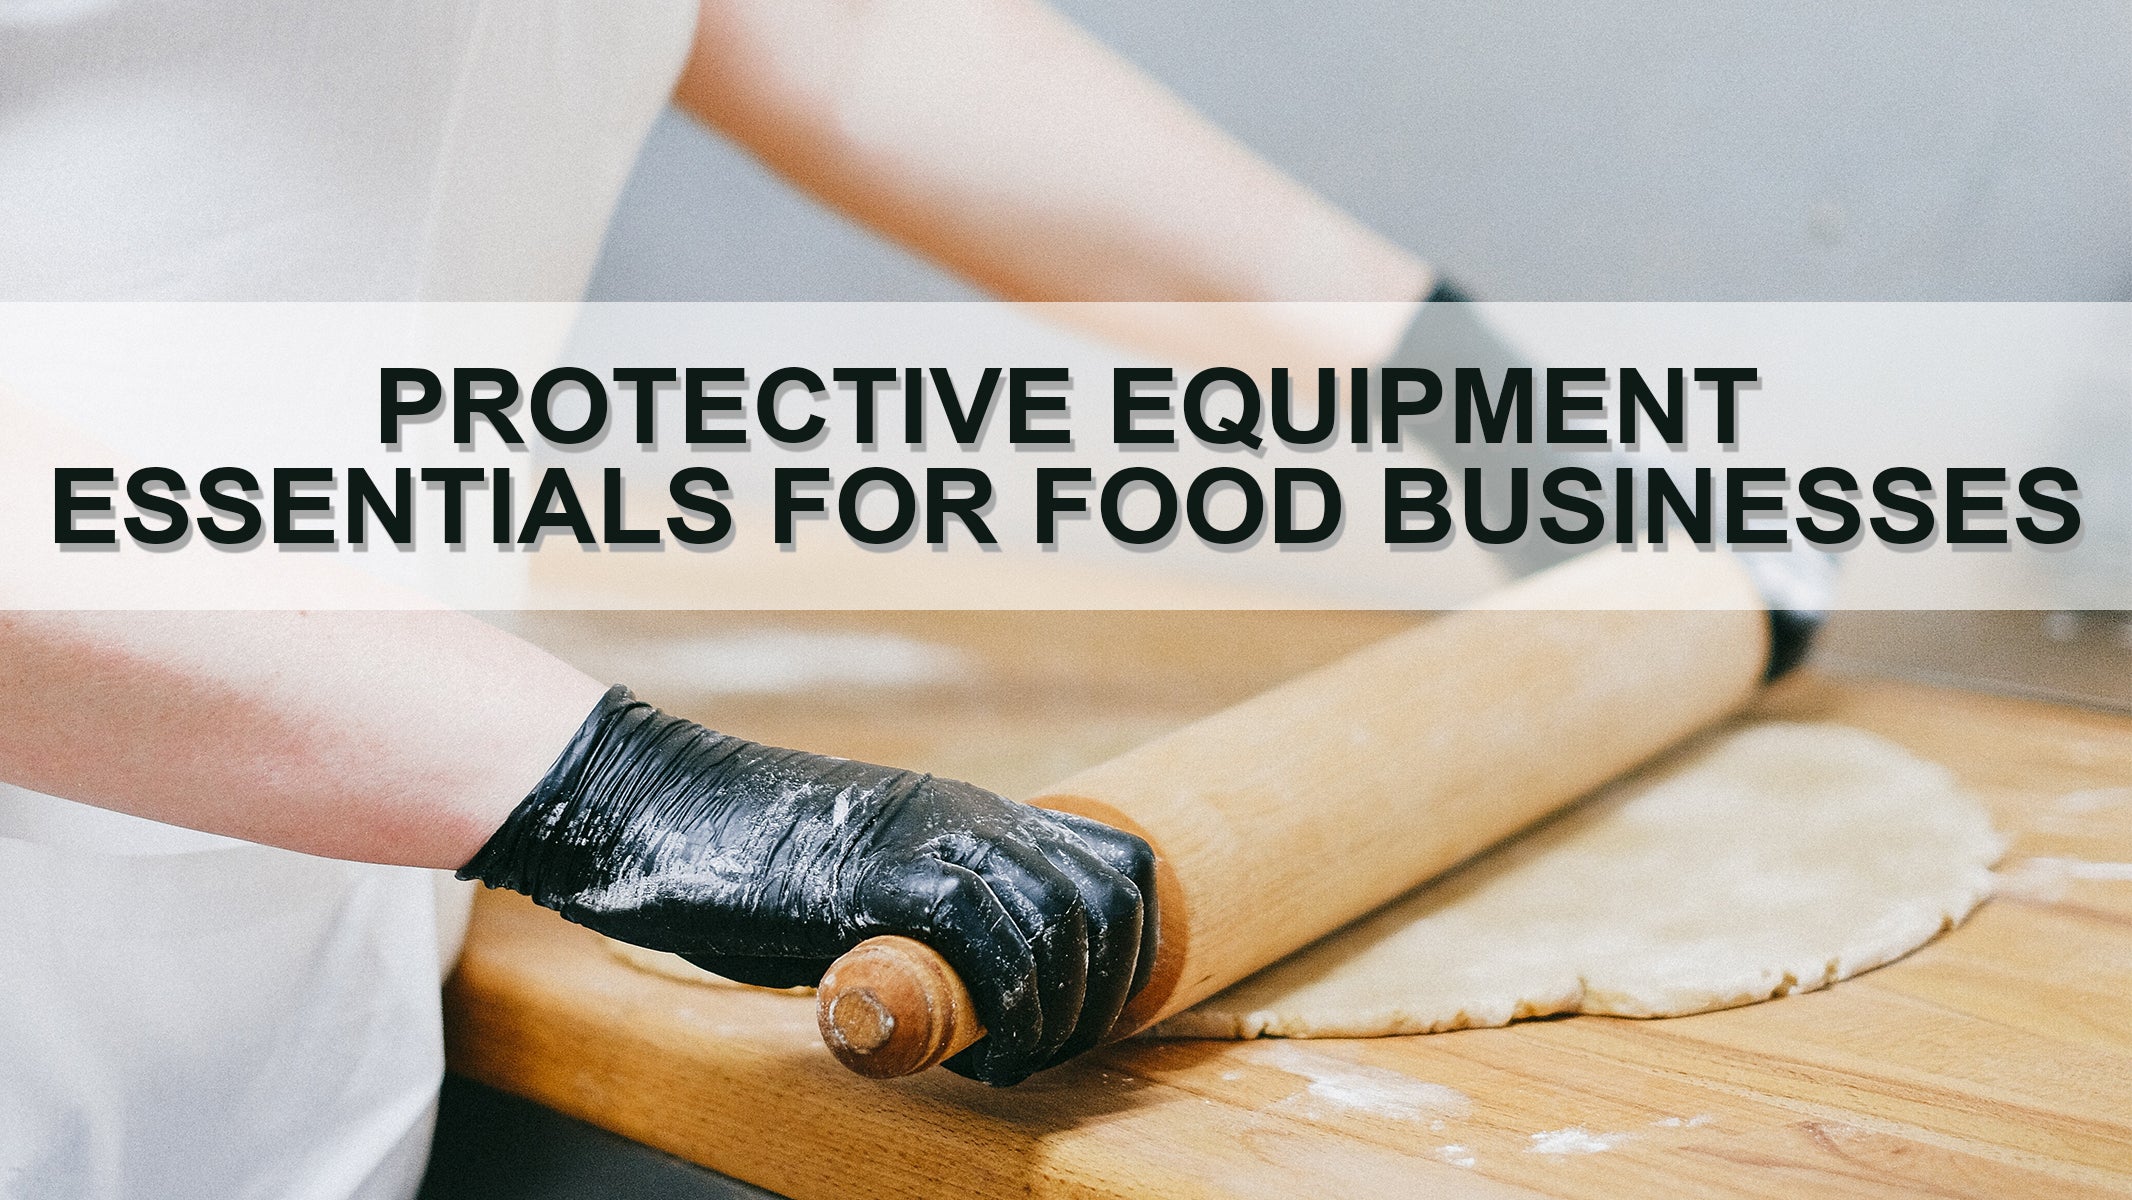 Protective Equipment Essentials for Food Businesses